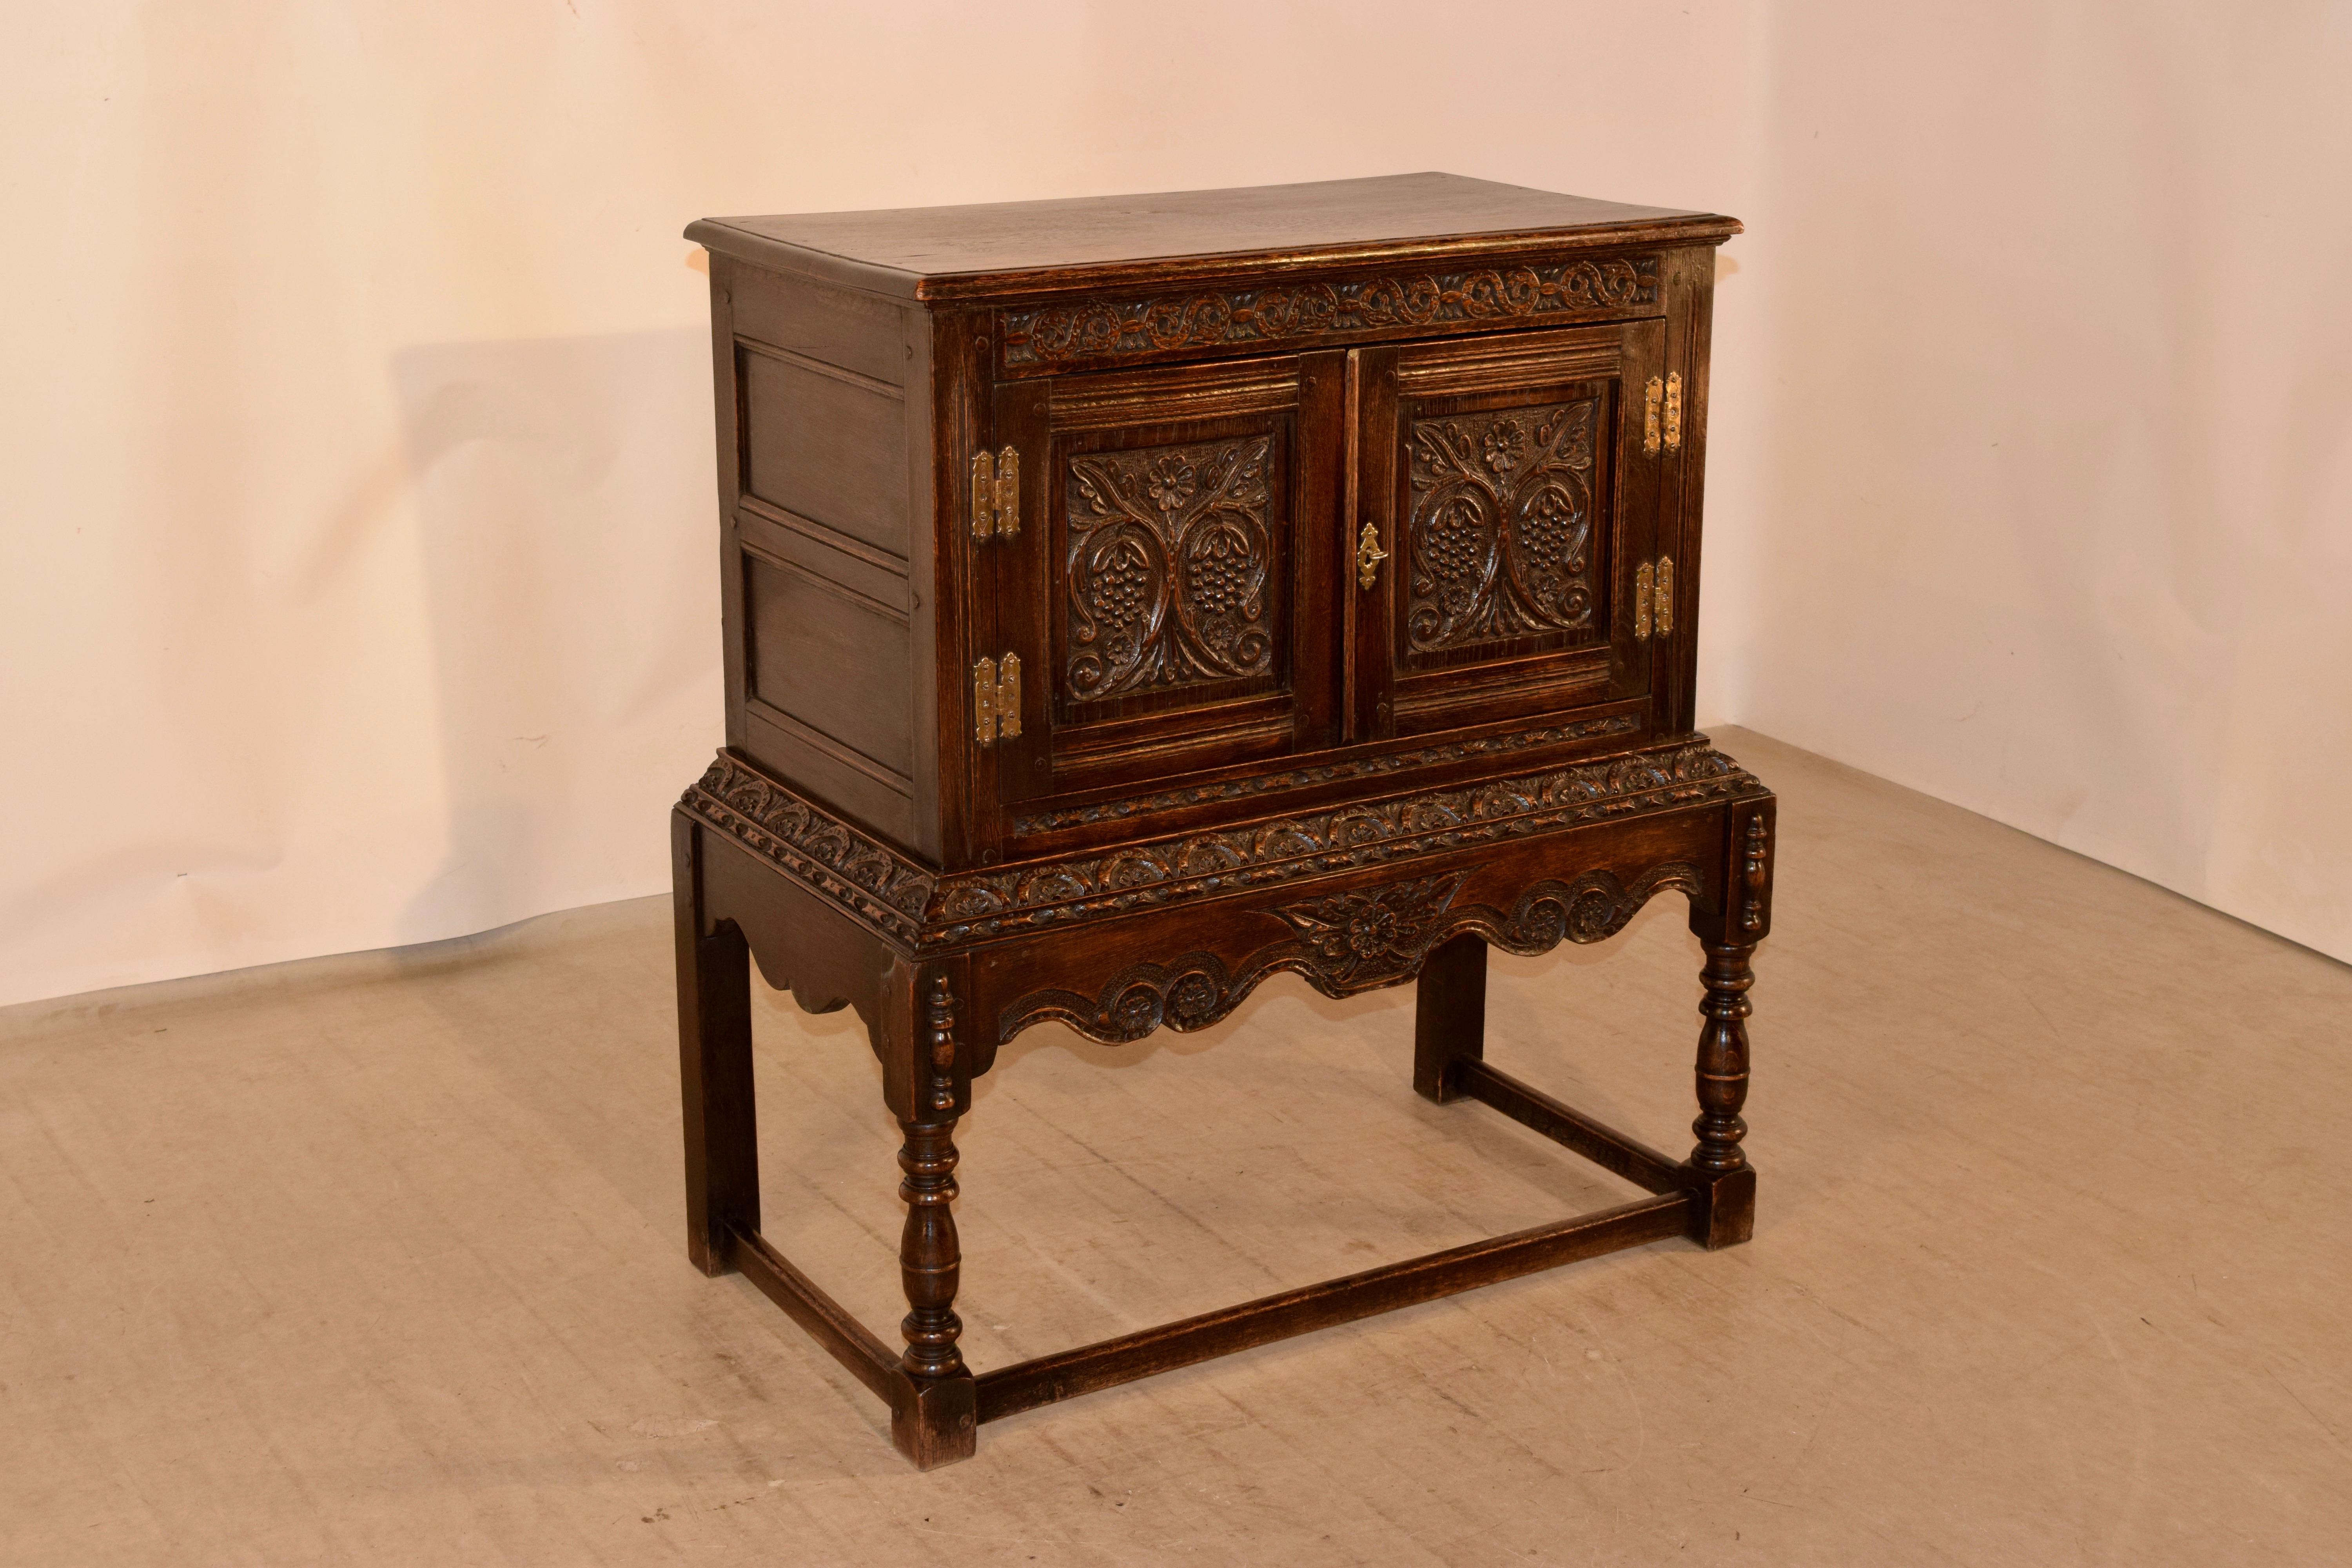 19th century oak cabinet on stand from England with a beveled edge around the top following down to hand paneled sides and a spectacularly hand carved decorated frieze over two paneled doors, which also have carved decorated panels over a lovely